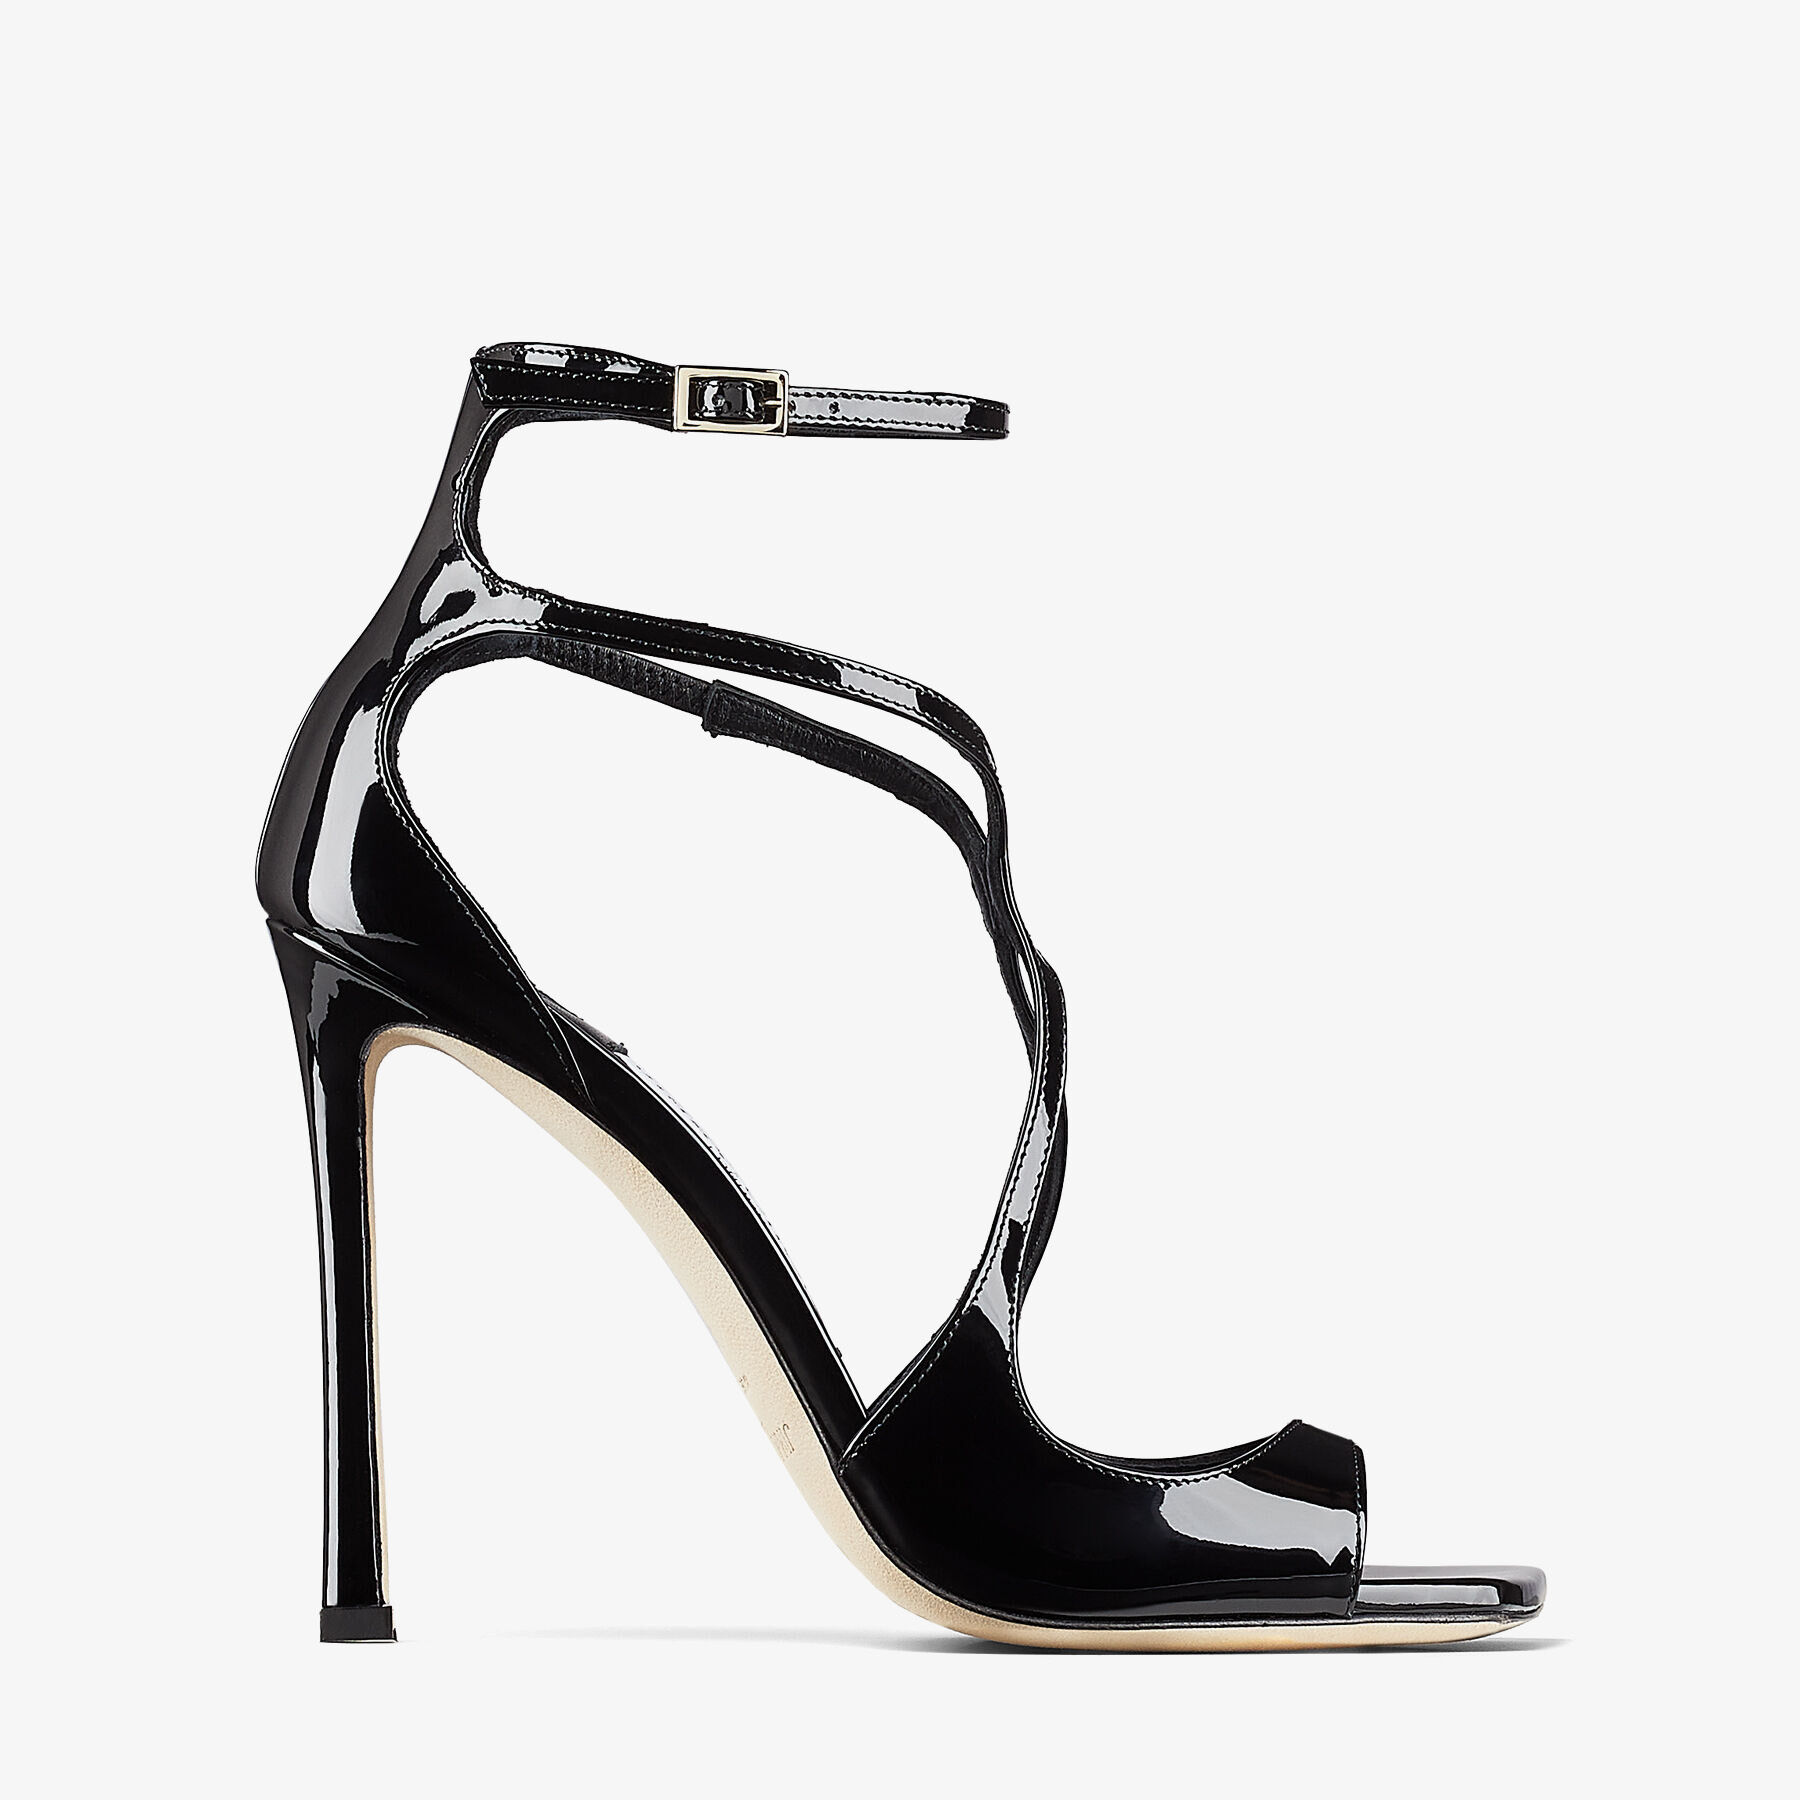 Black Patent Leather Sandals | AZIA 110 | Winter 2021 Collection